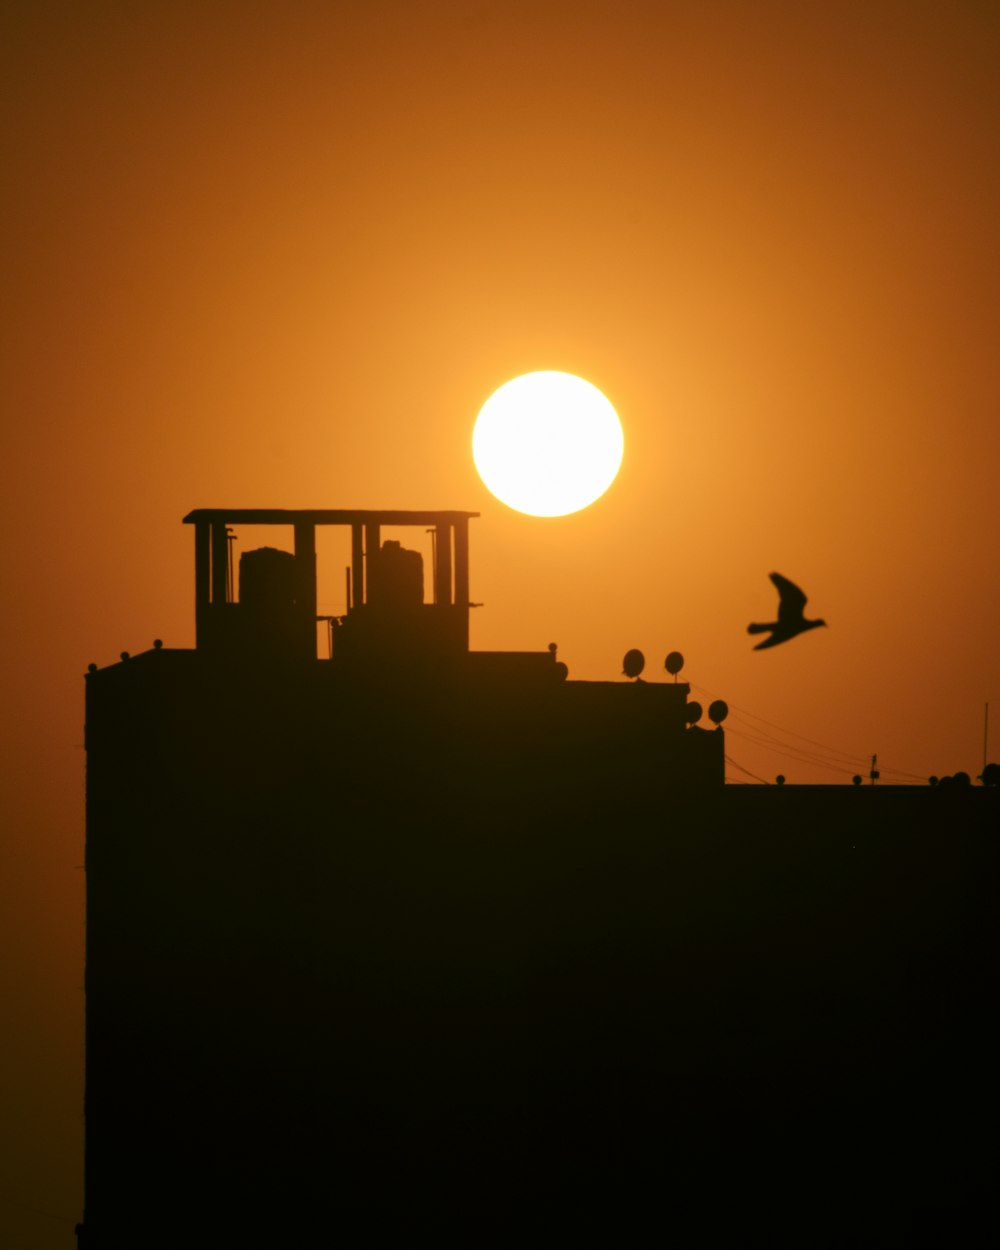 the sun is setting behind a building with a bird flying by